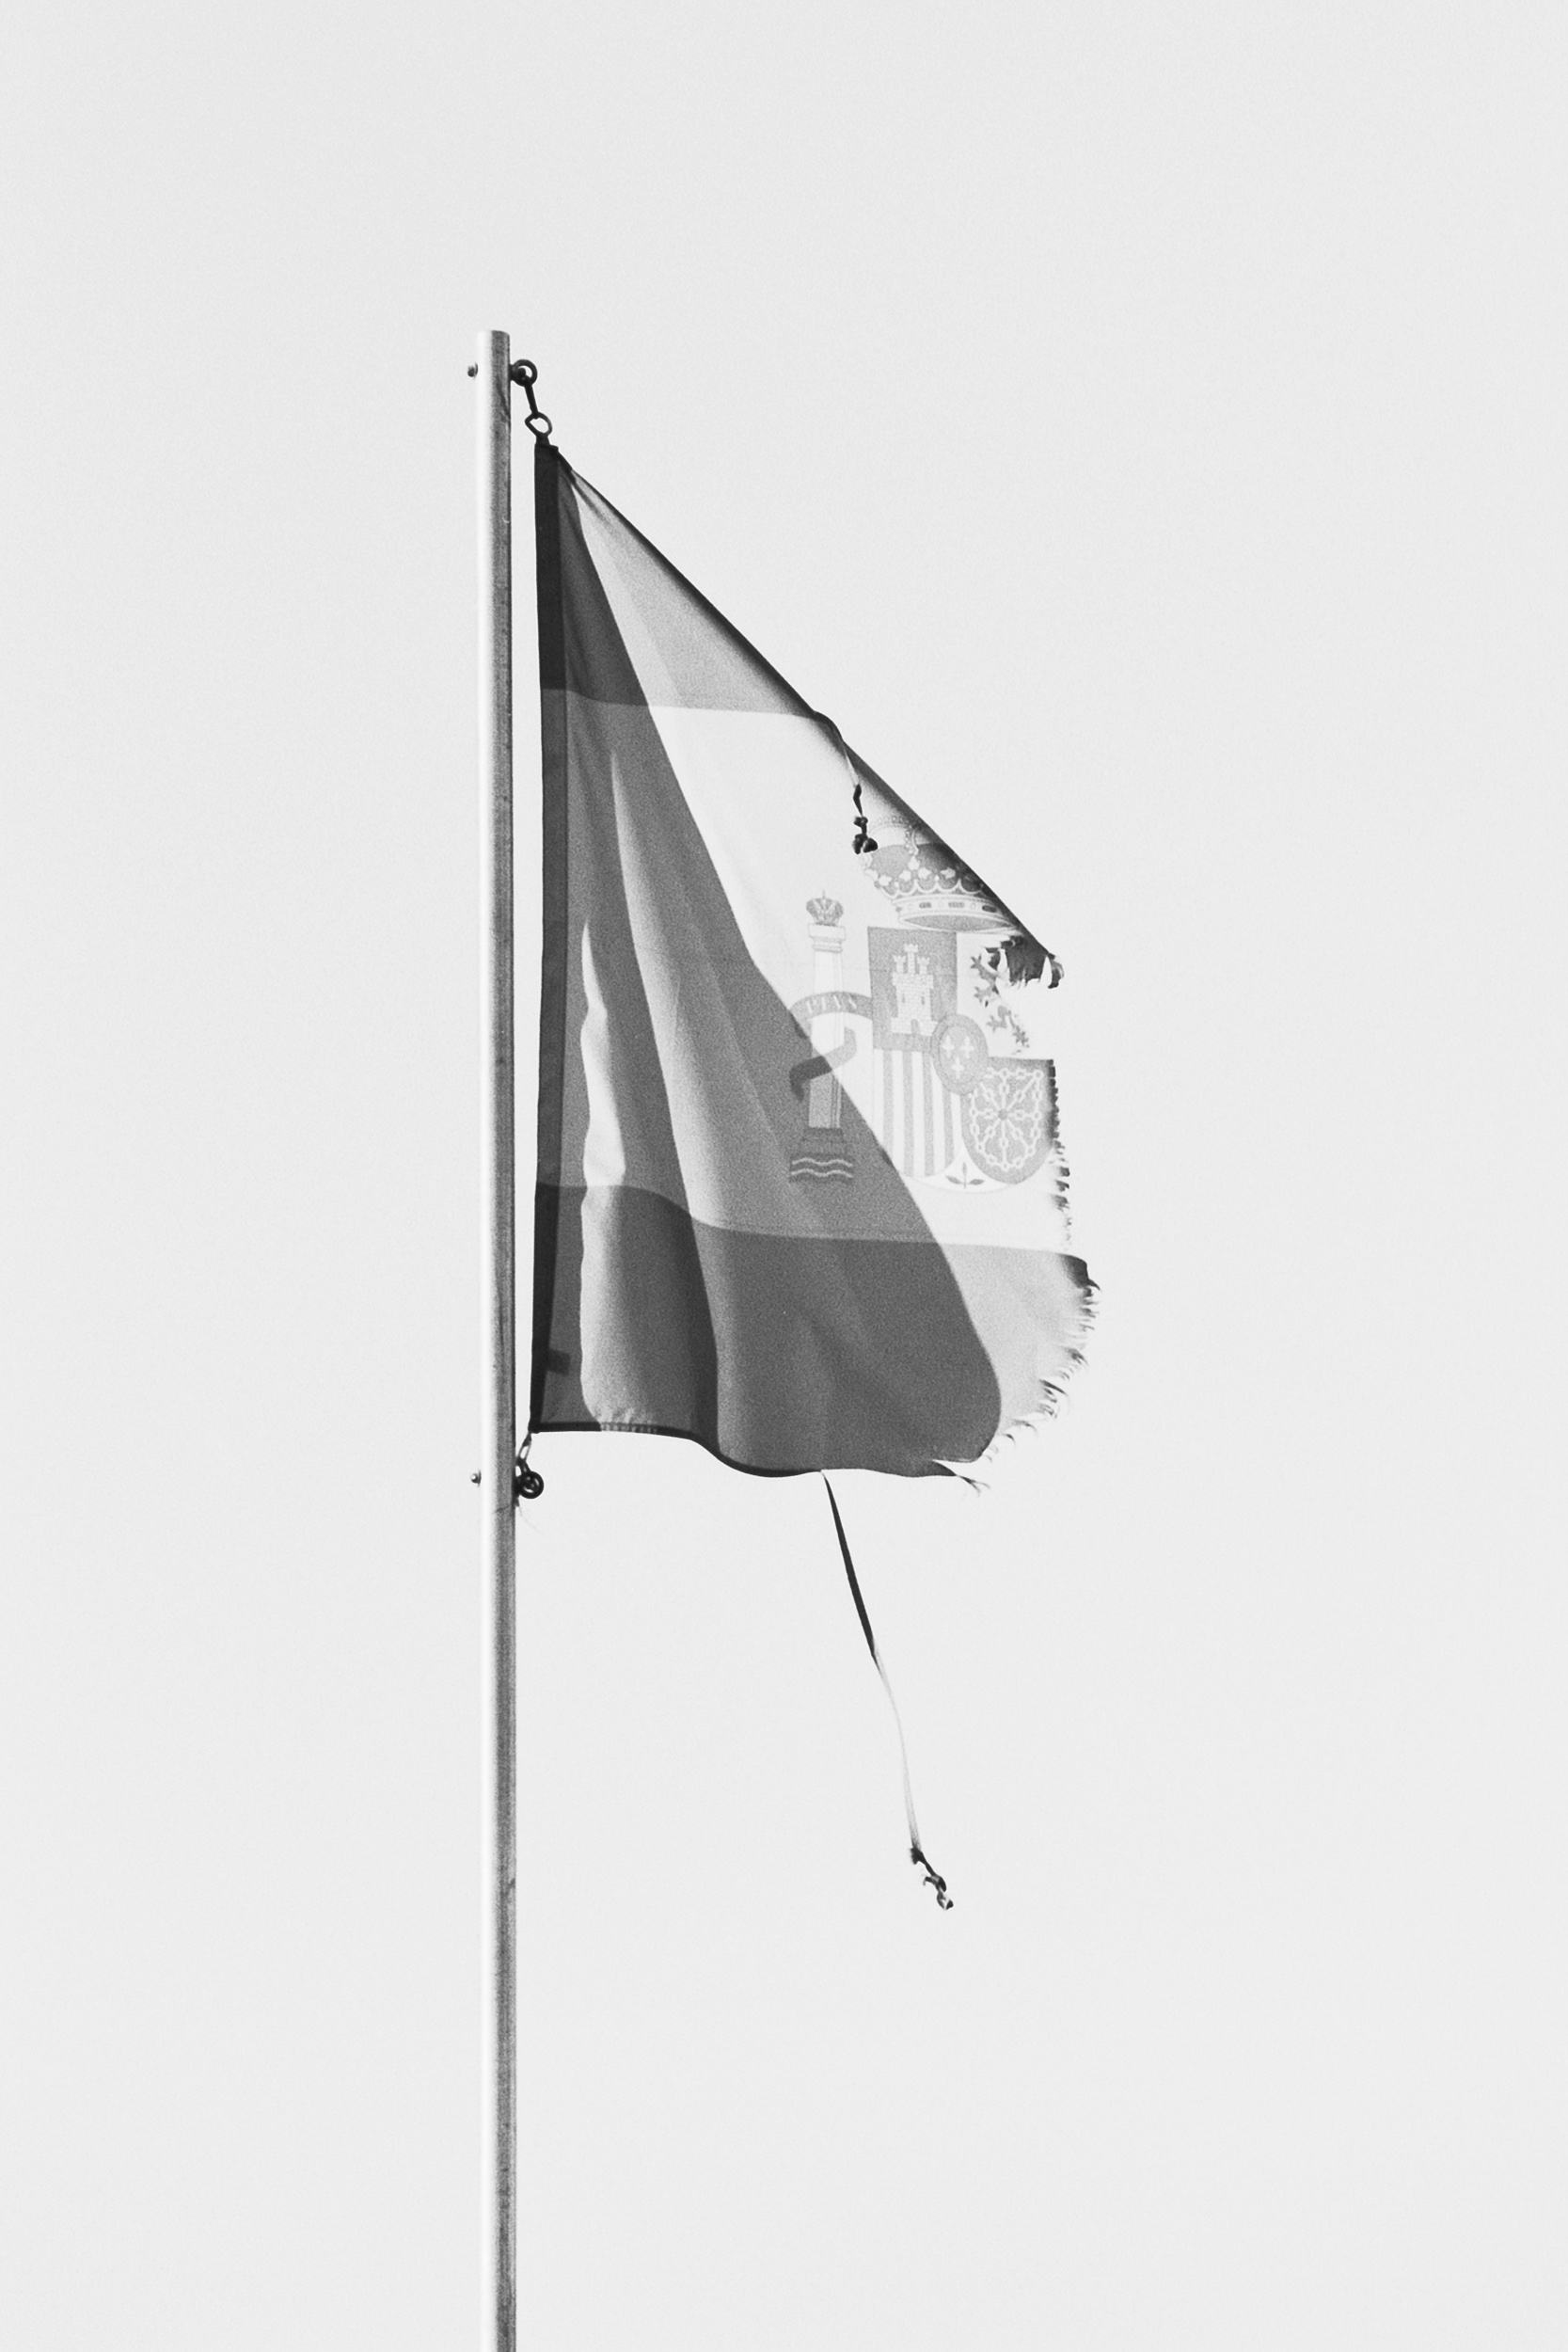 Black and white image of a Franco-era flag on a flag pole. The flag is torn and only one half remains. © Ignacio Navas